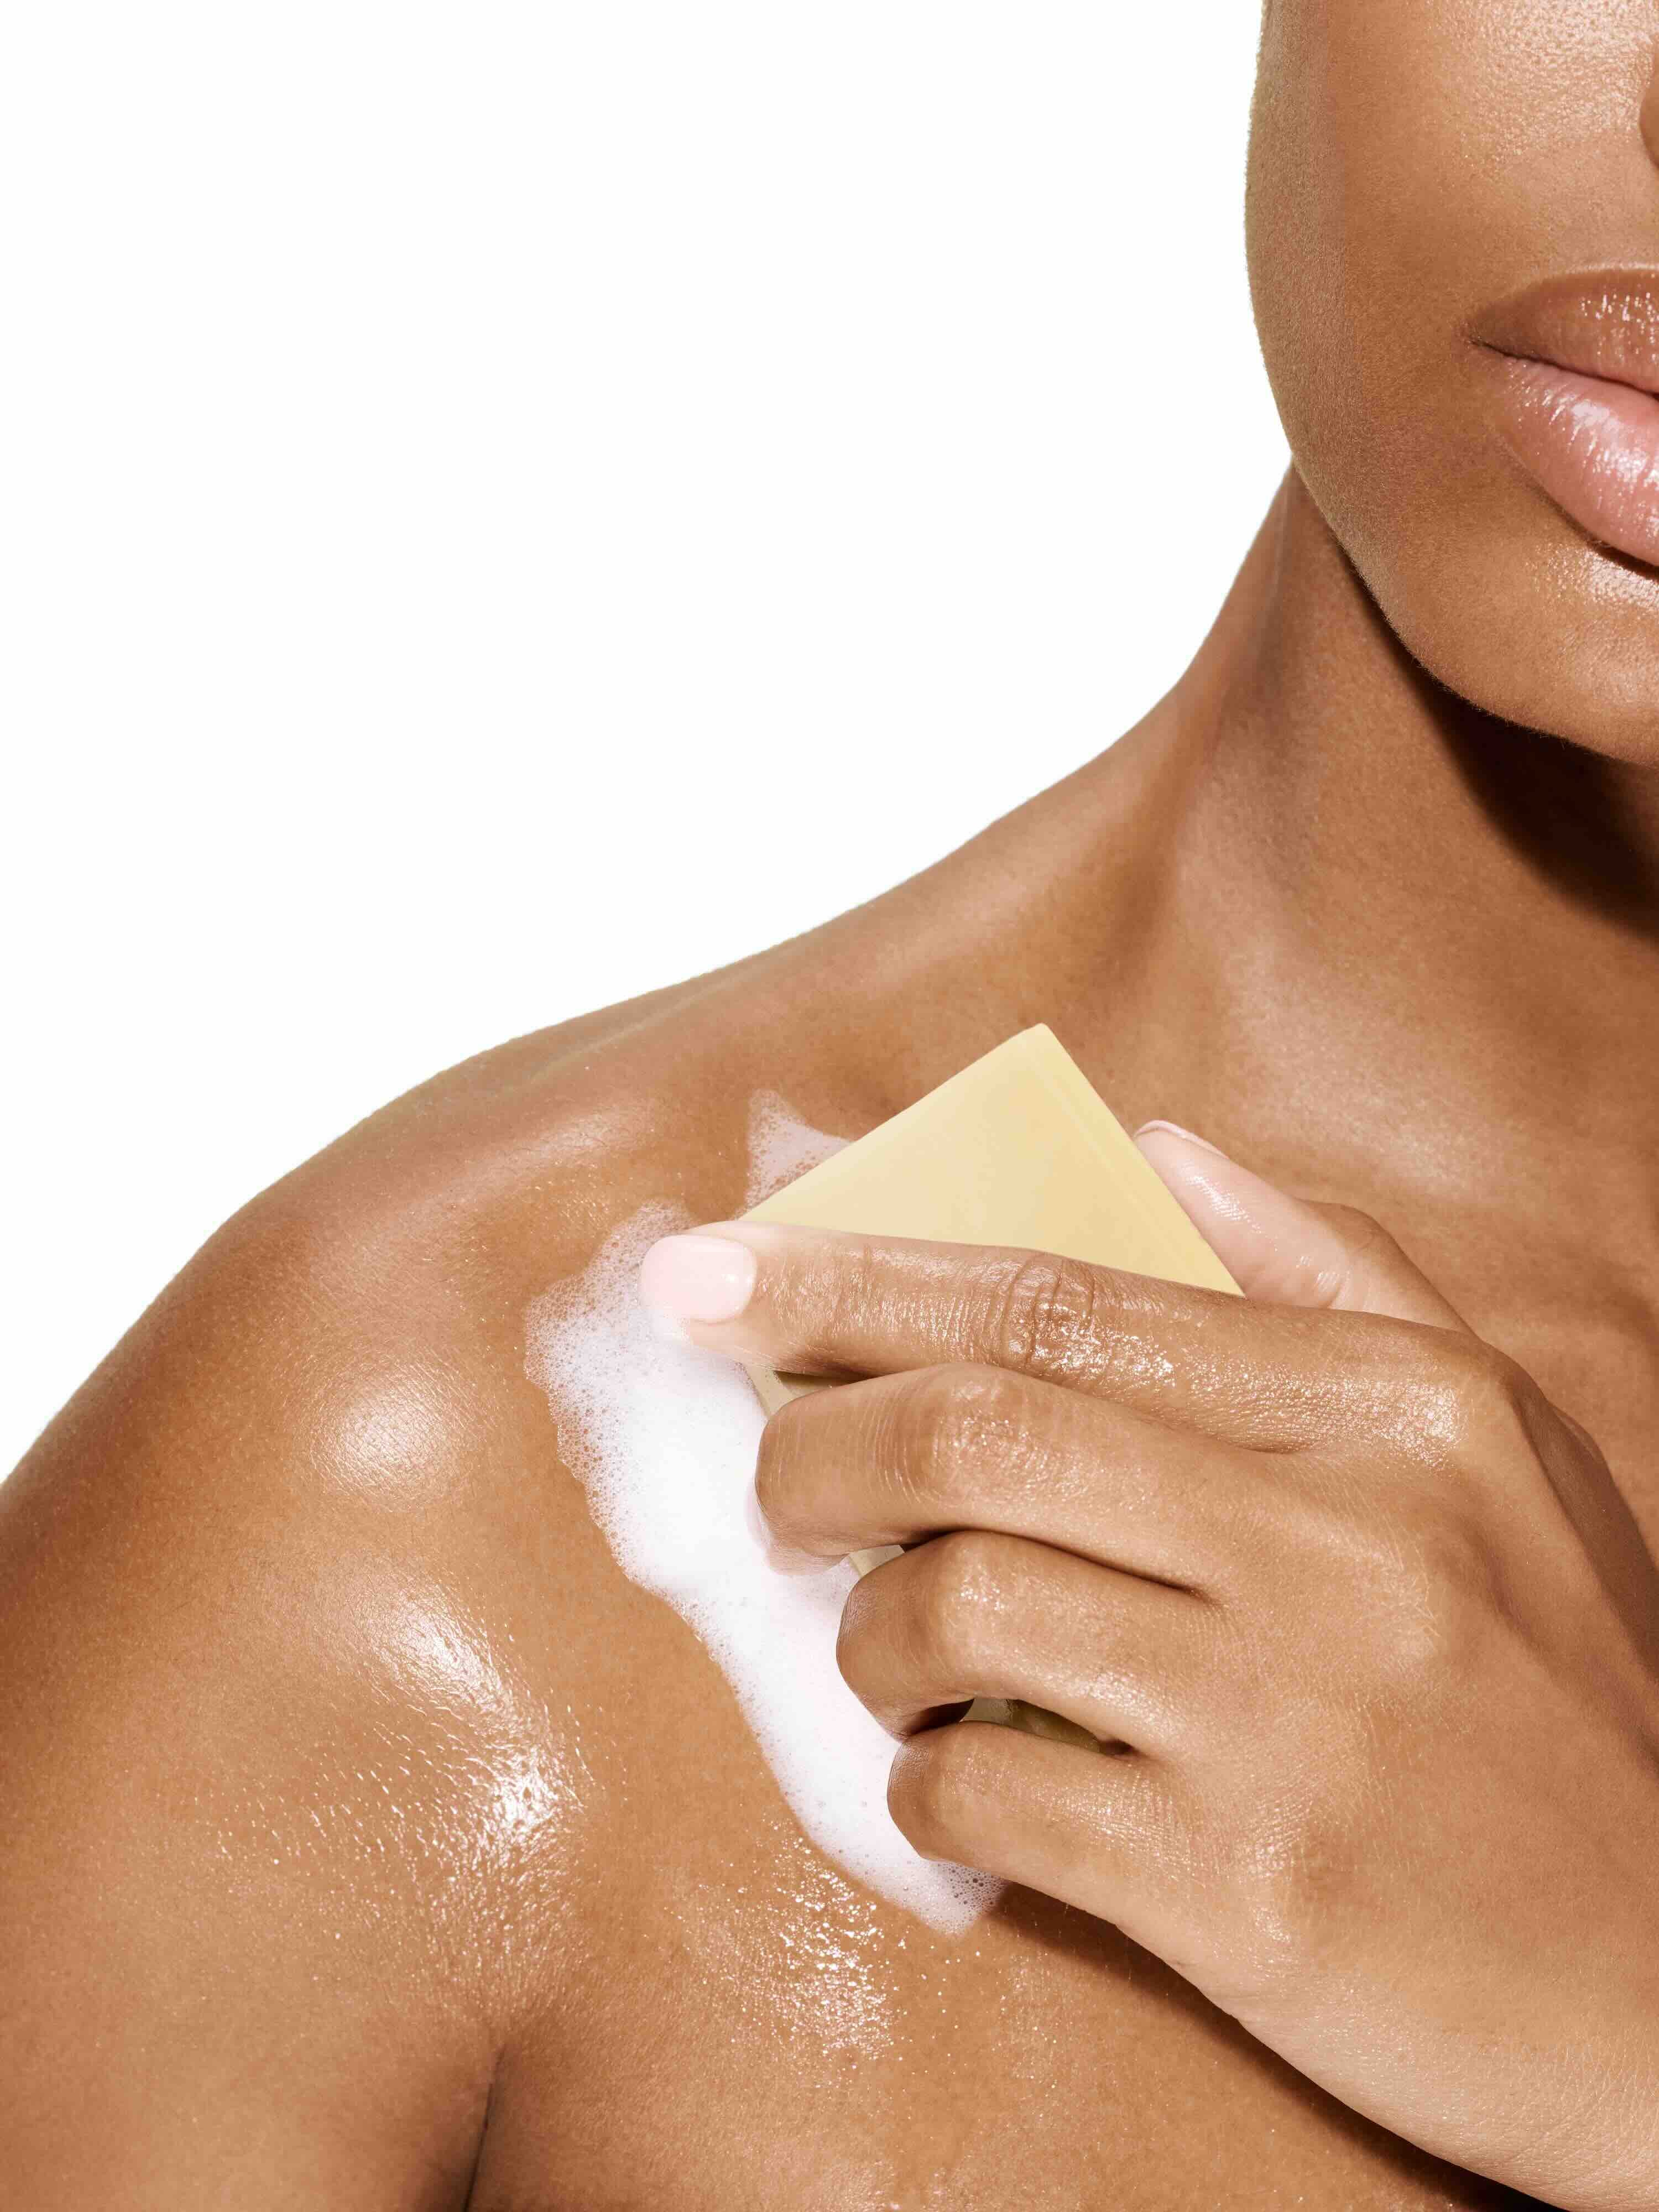 Image of a female model using a bar of Antü Refreshing Soap on her shoulder.